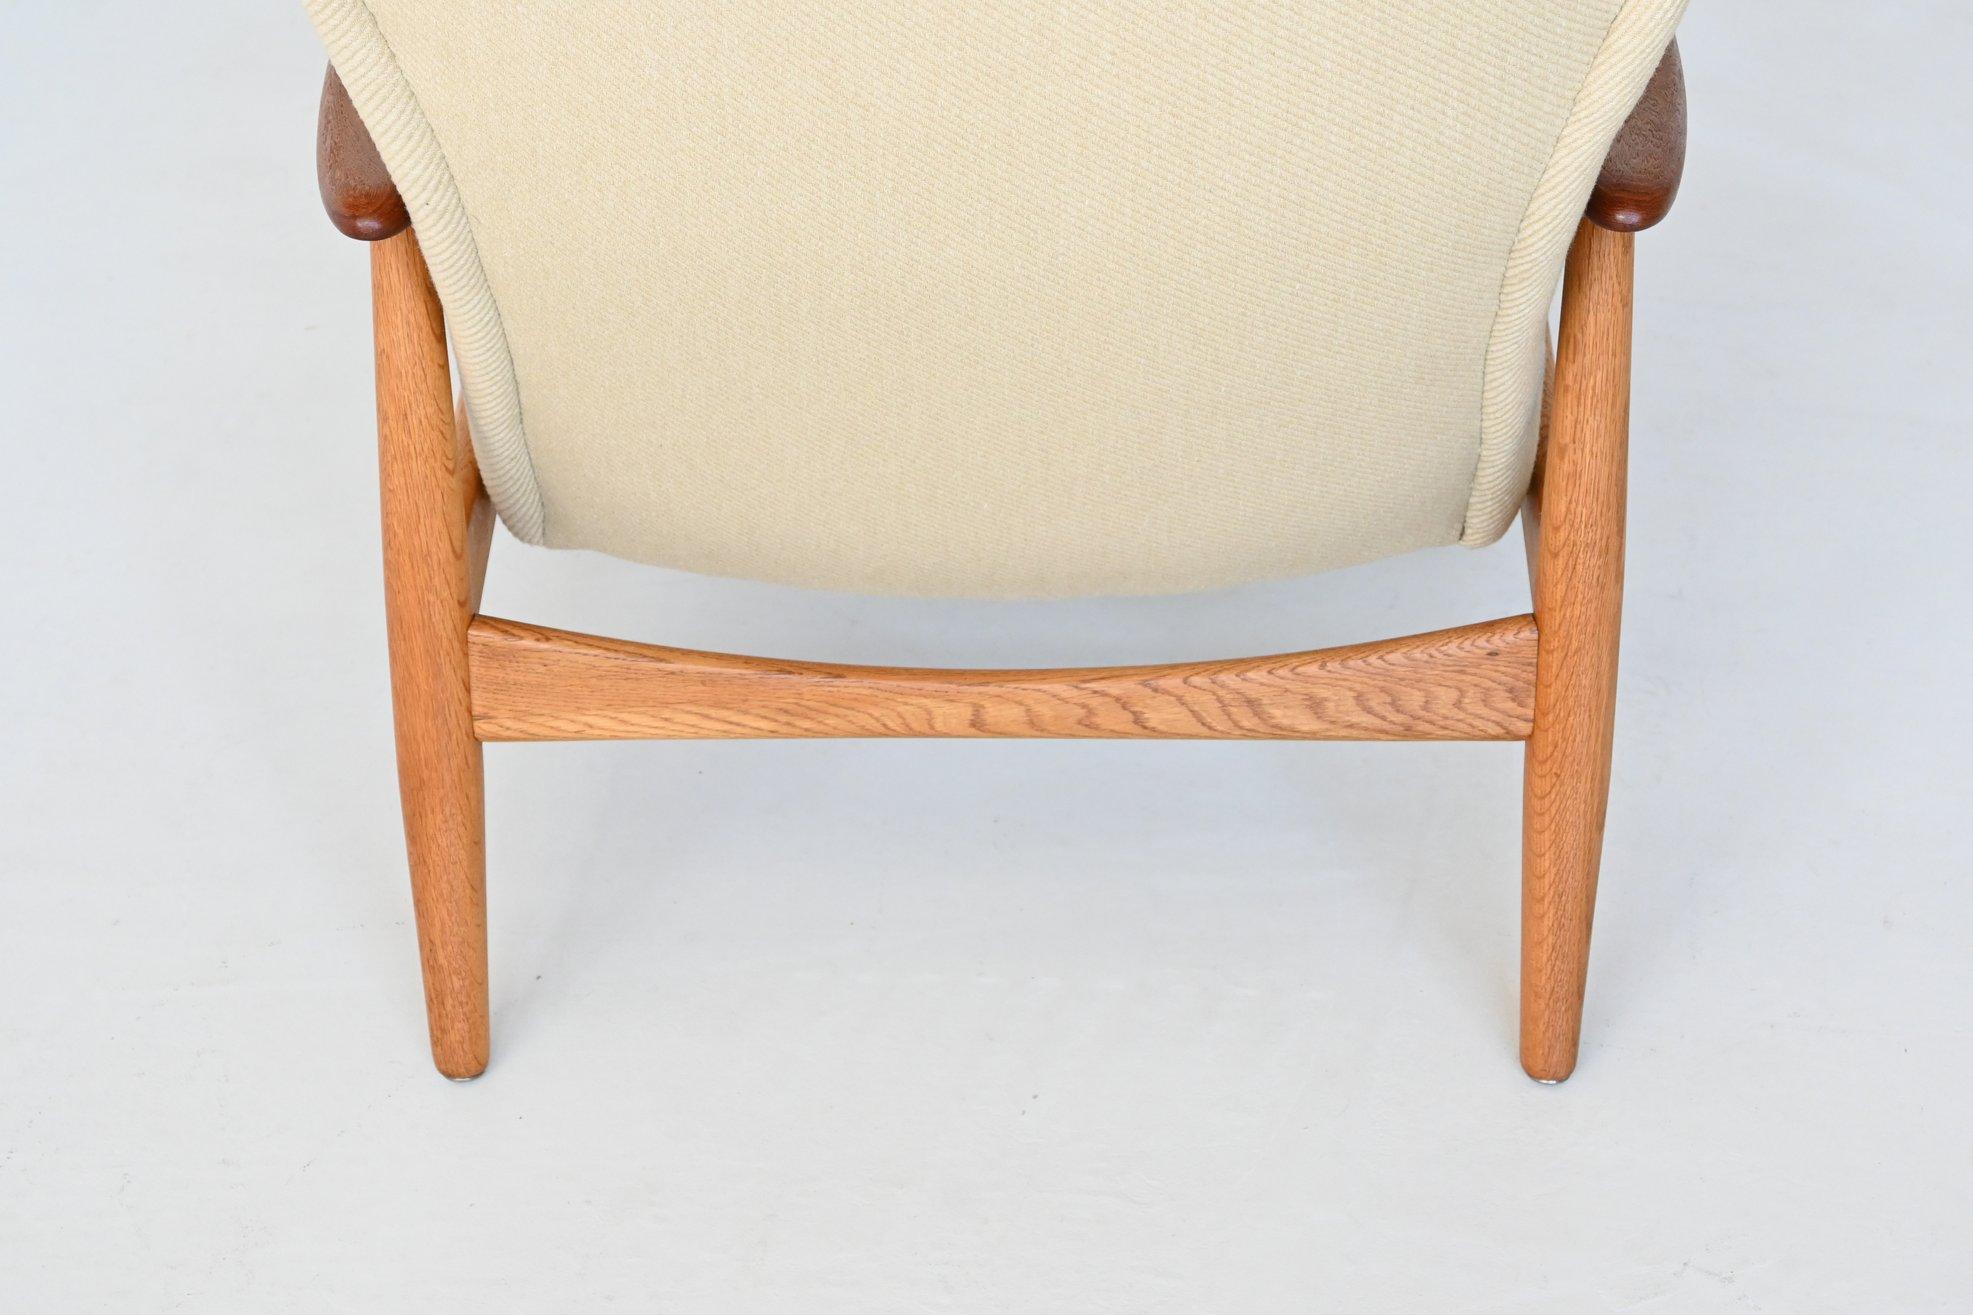 Madsen & Schubell Mette lounge chair Bovenkamp The Netherlands 1960 For Sale 4